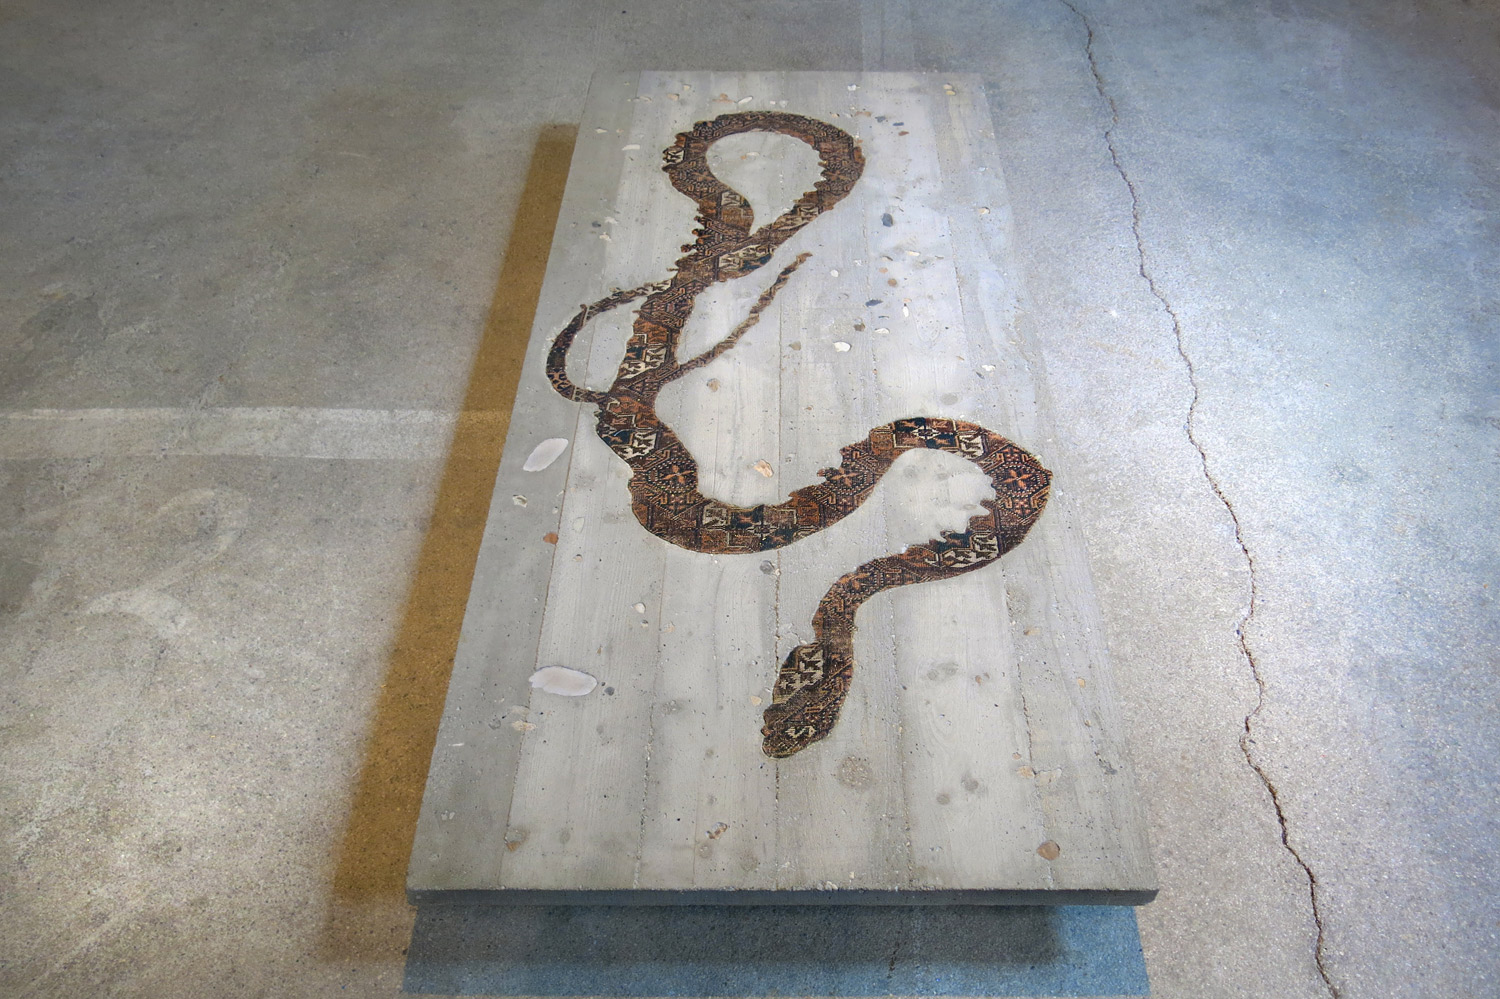 web222-noemi-kiss-marion-friedmann-gallery-Serpent-Table-cut-out-rug-inlaid-in-concrete-Hipphalle-photo-MarionFriedmann.jpg